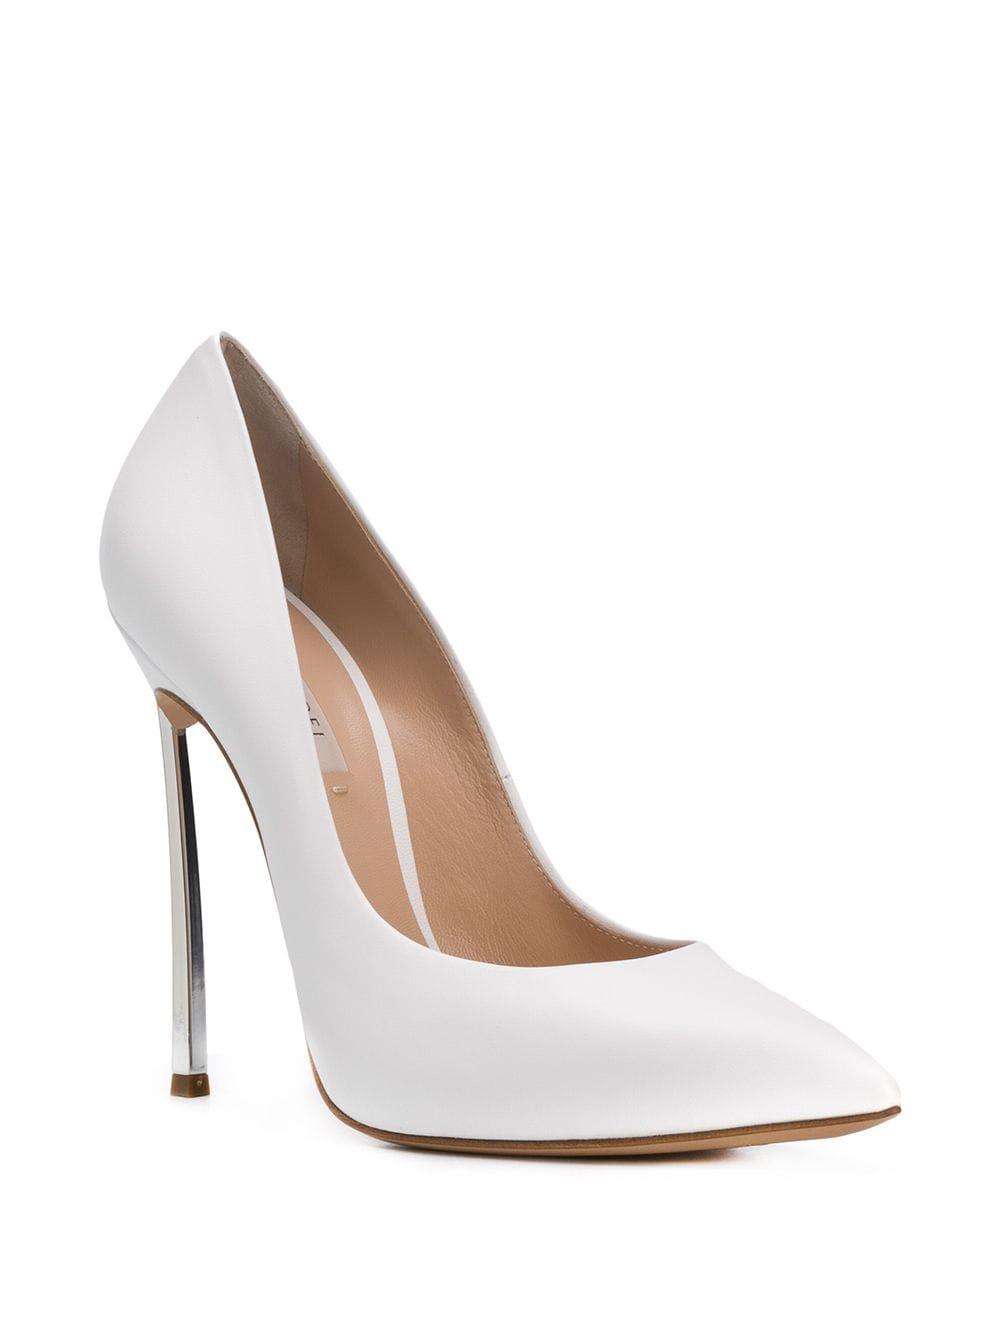 Casadei Leather 120mm Pointed-toe Stiletto Pumps in White - Lyst